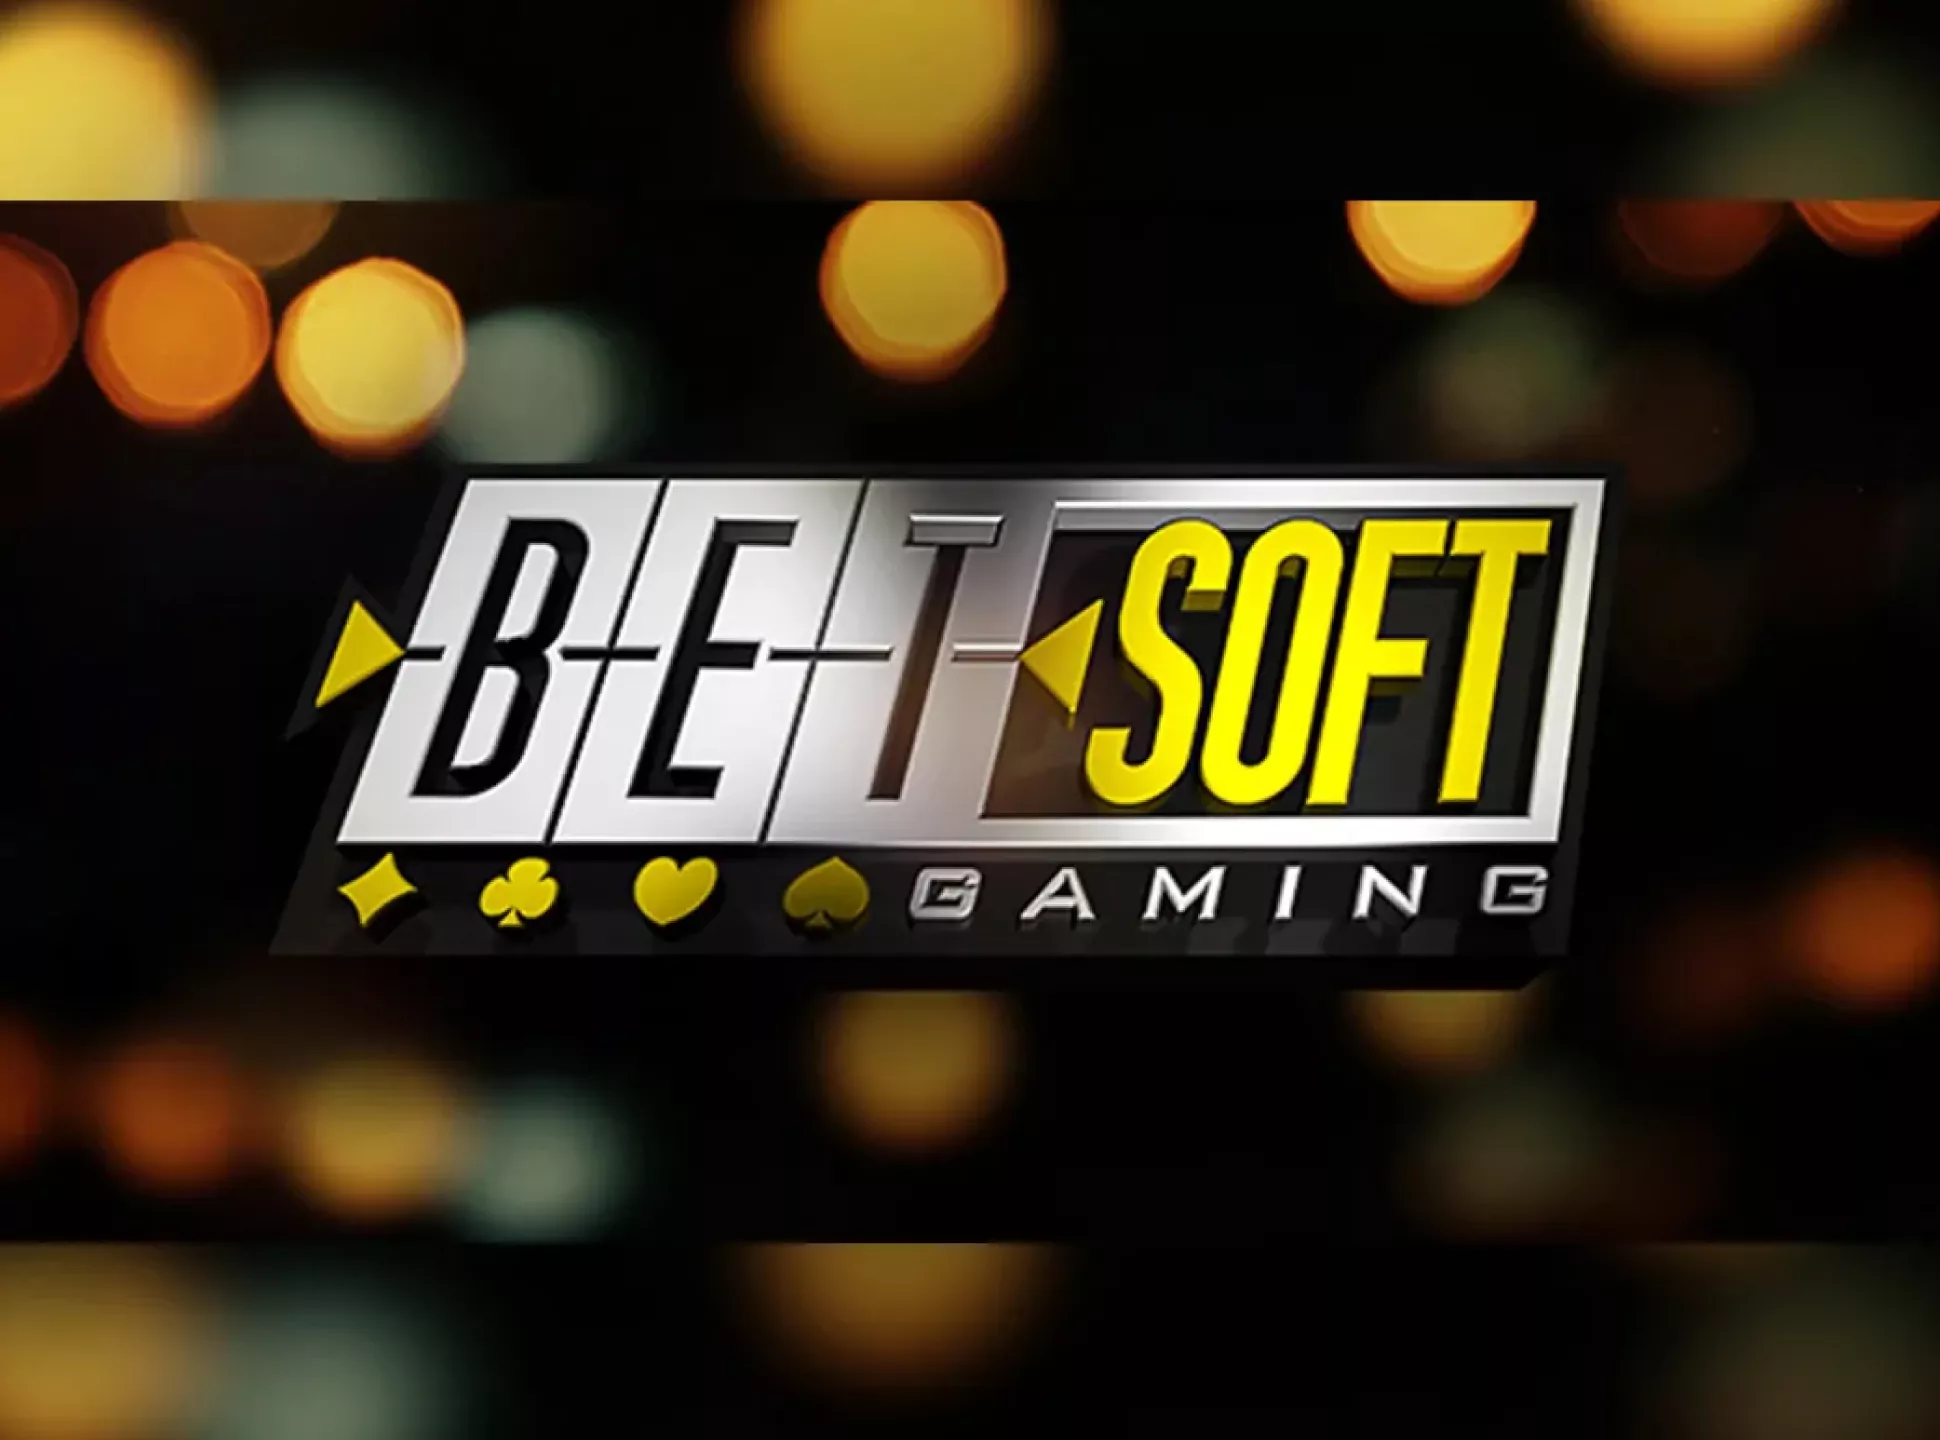 One of the oldest game provider BetSoft.